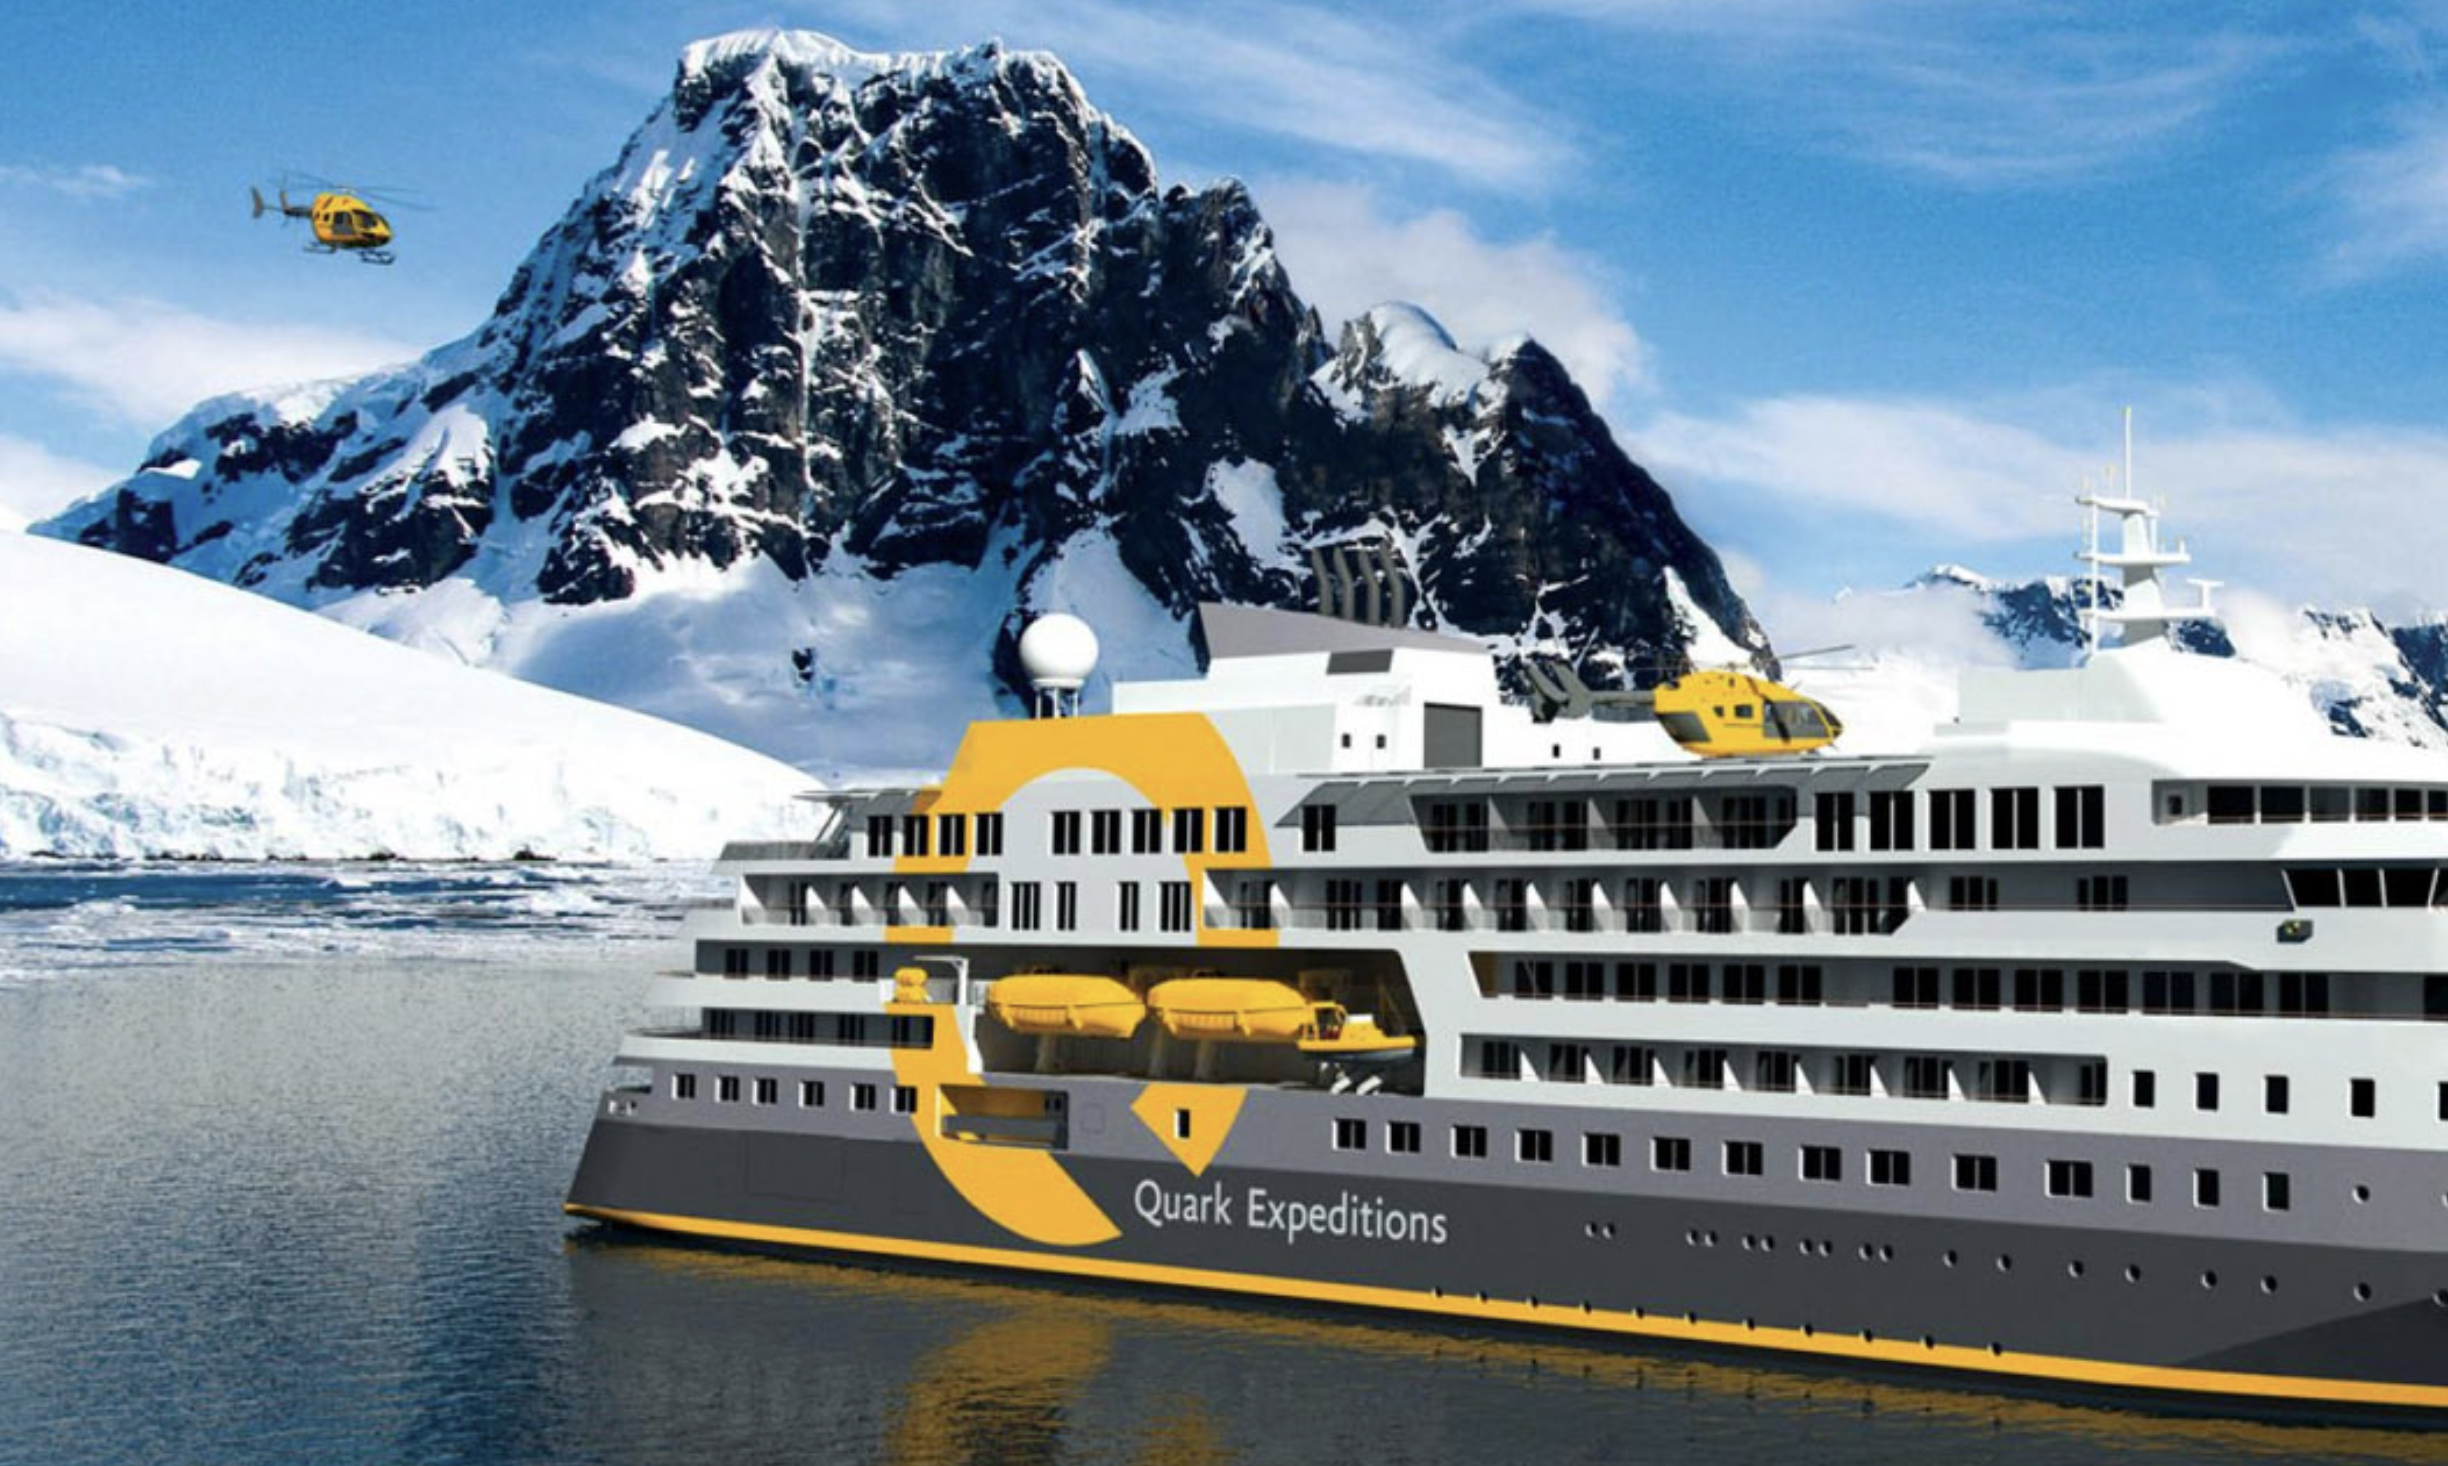 New luxury ships offer choppers and subs, but the most popular Arctic destination won’t allow it